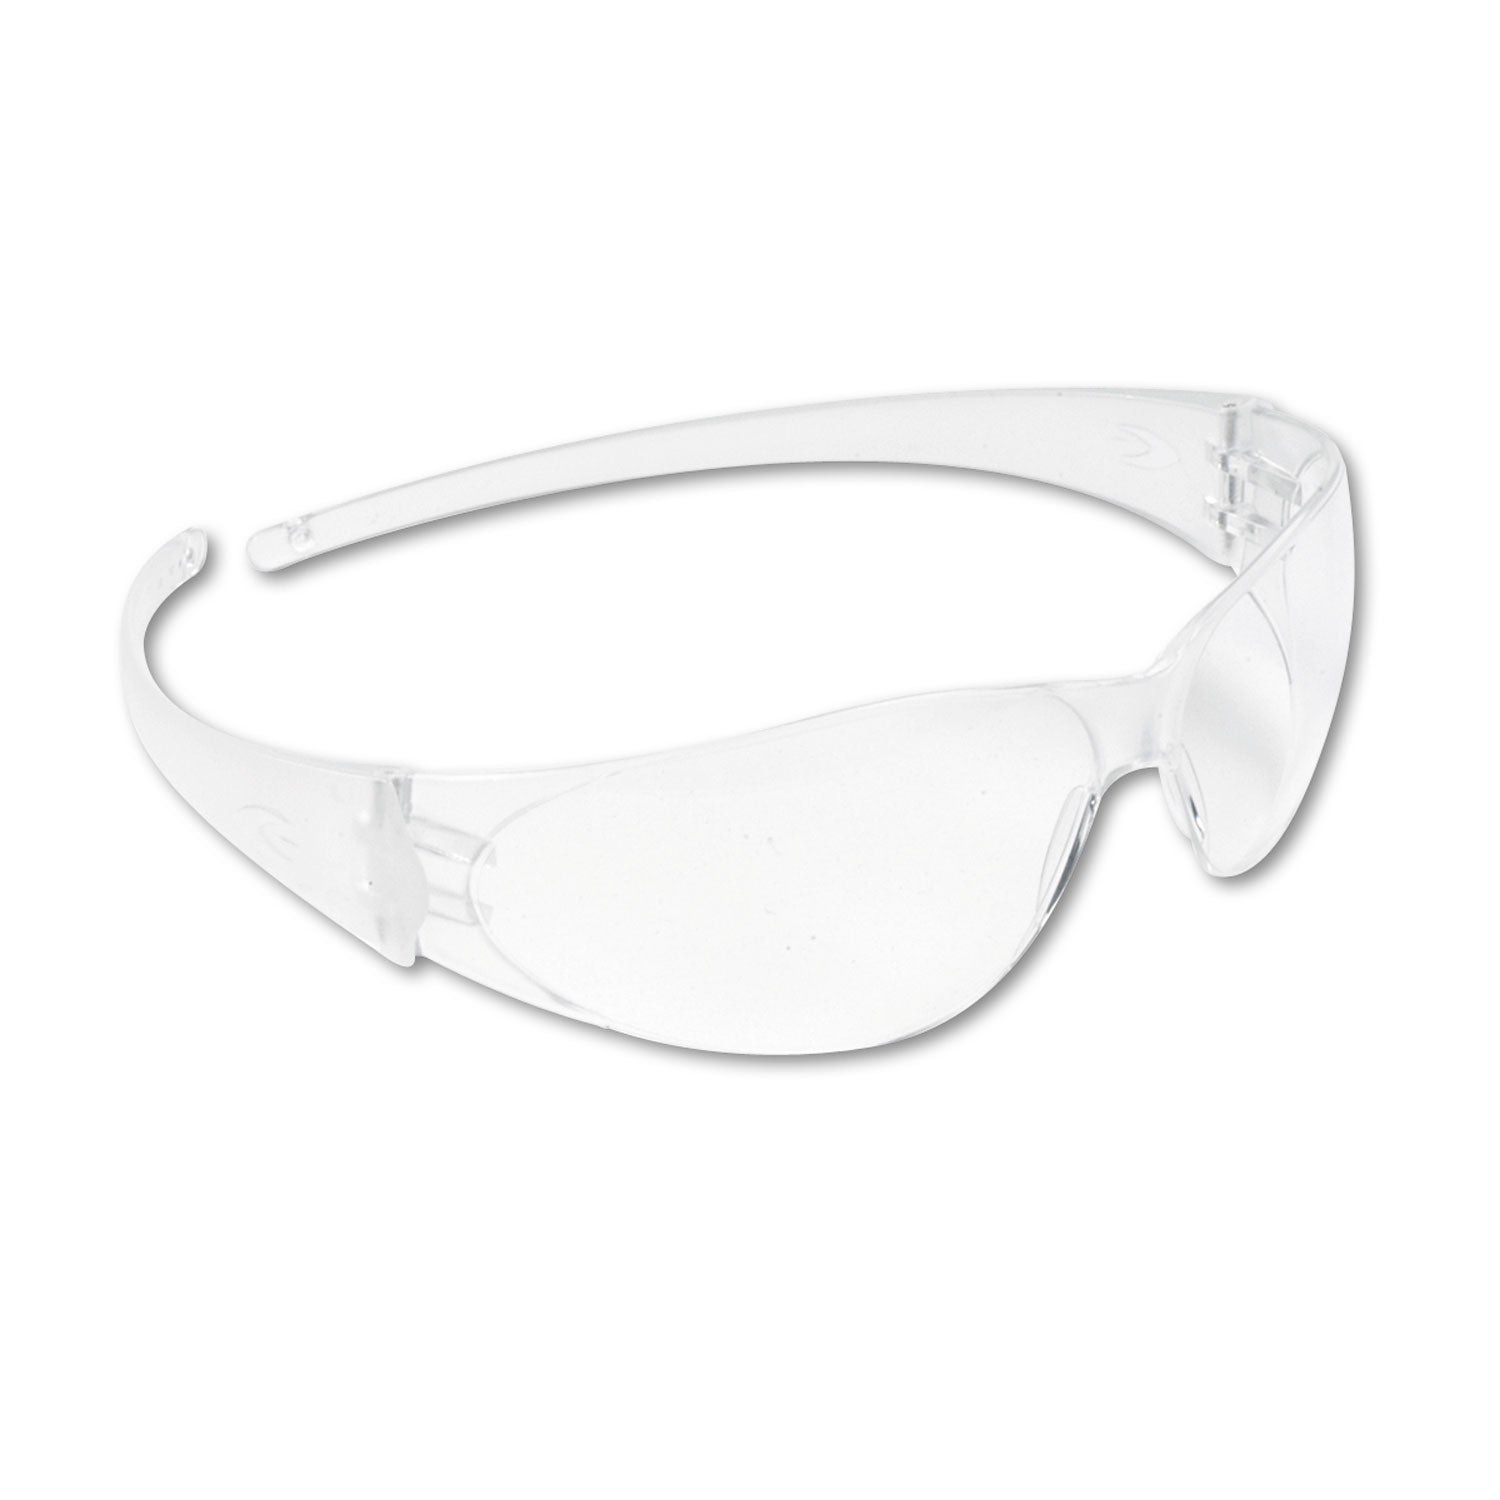 Checkmate Wraparound Safety Glasses, CLR Polycarbonate Frame, Coated Clear Lens - 